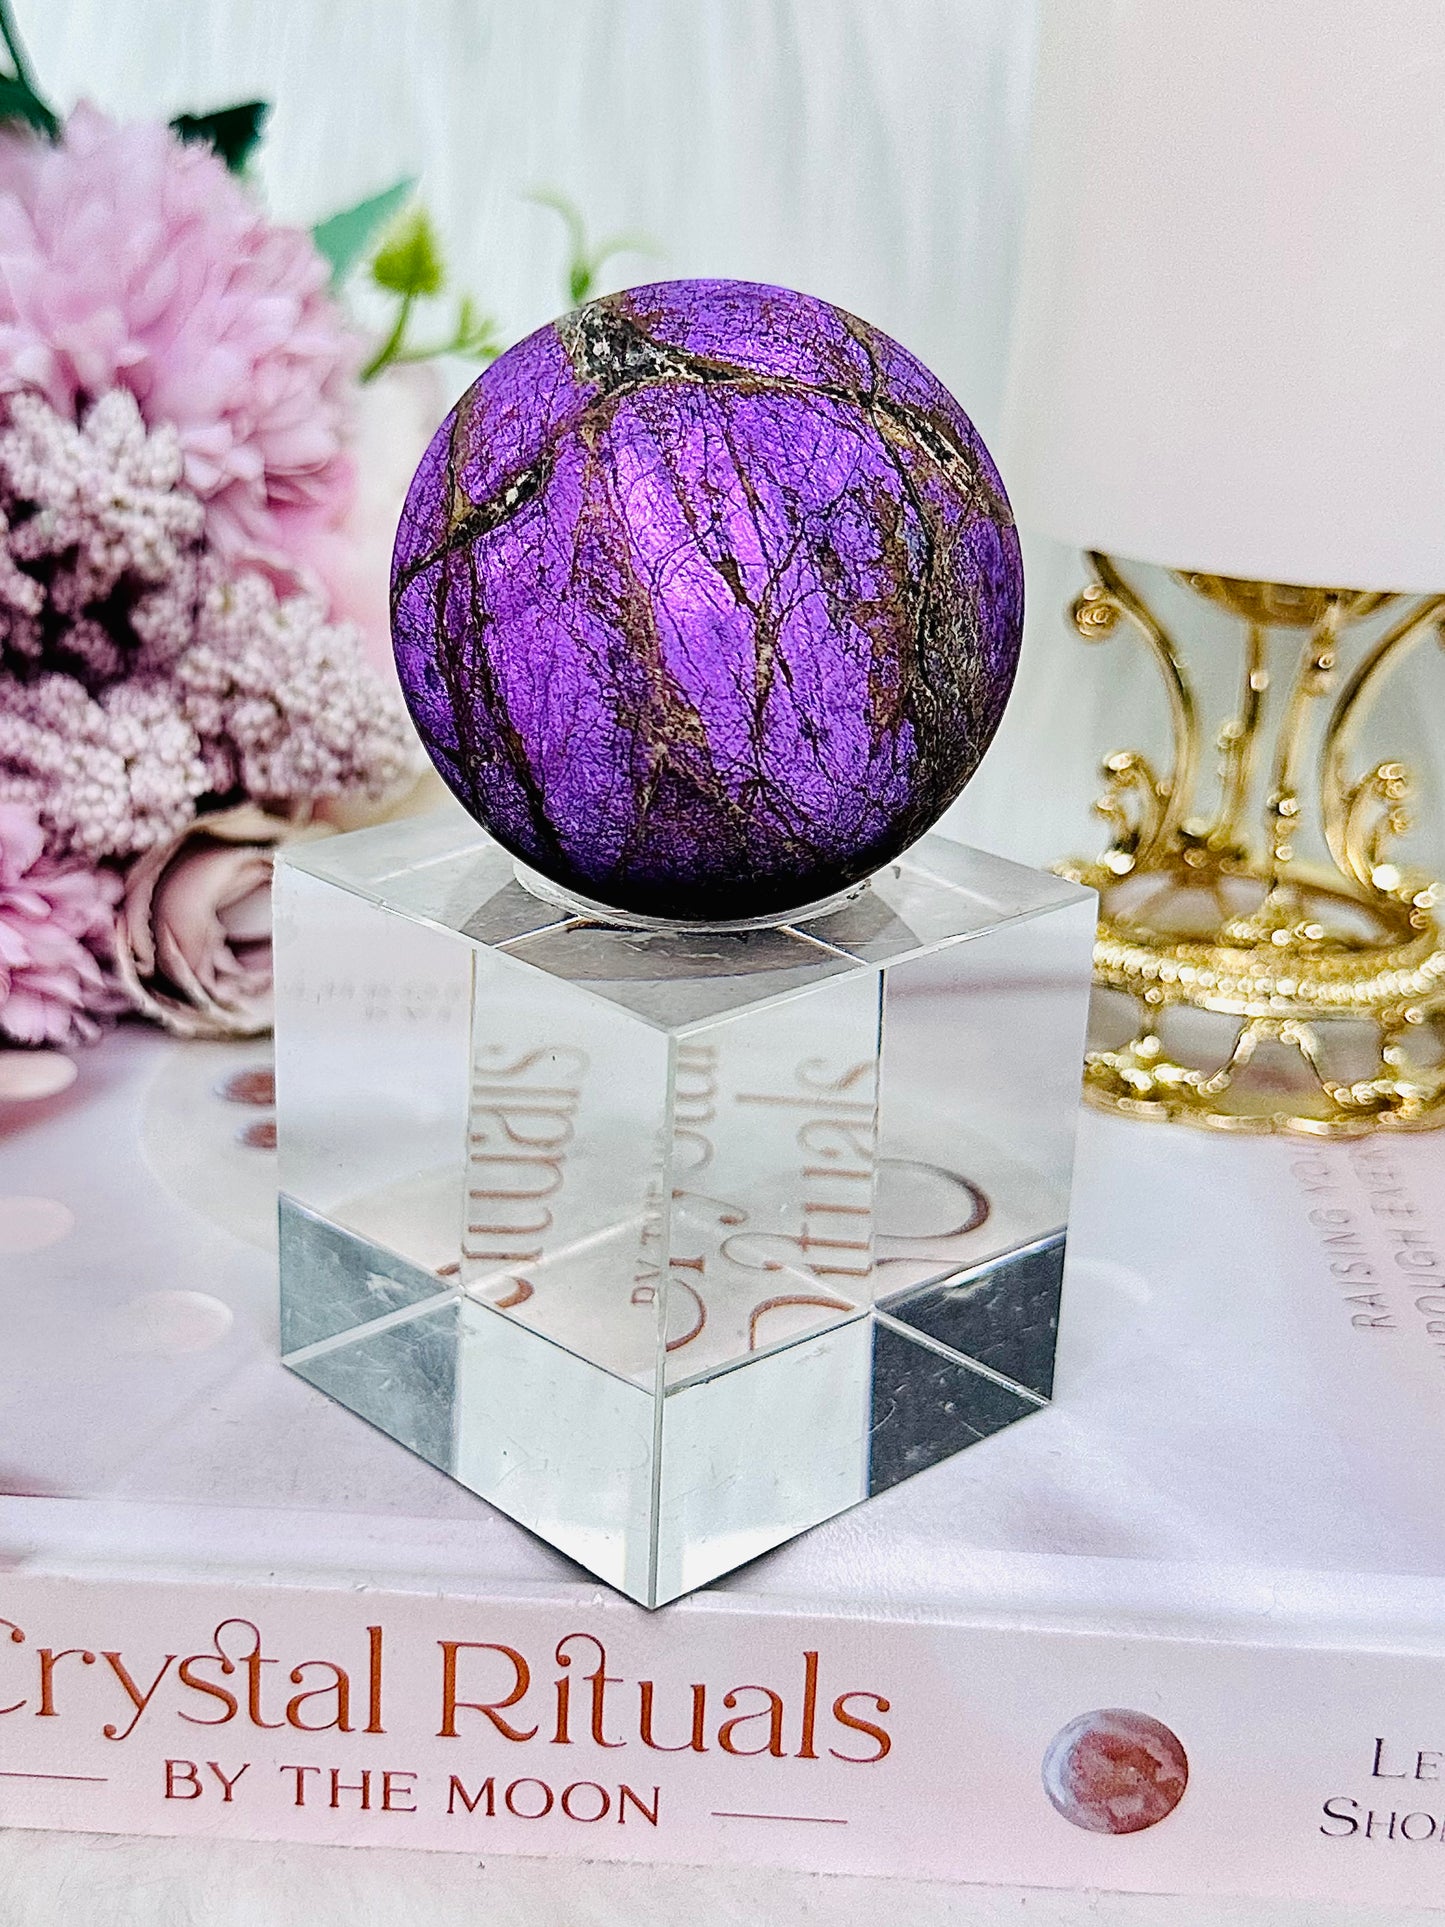 A Rare Collectors Piece ~ Exquisite Velvet Purpurite Crystal Sphere 225grams On Silver Stand (glass stand in pic is display only) ~ A Dream Piece For Any Collector